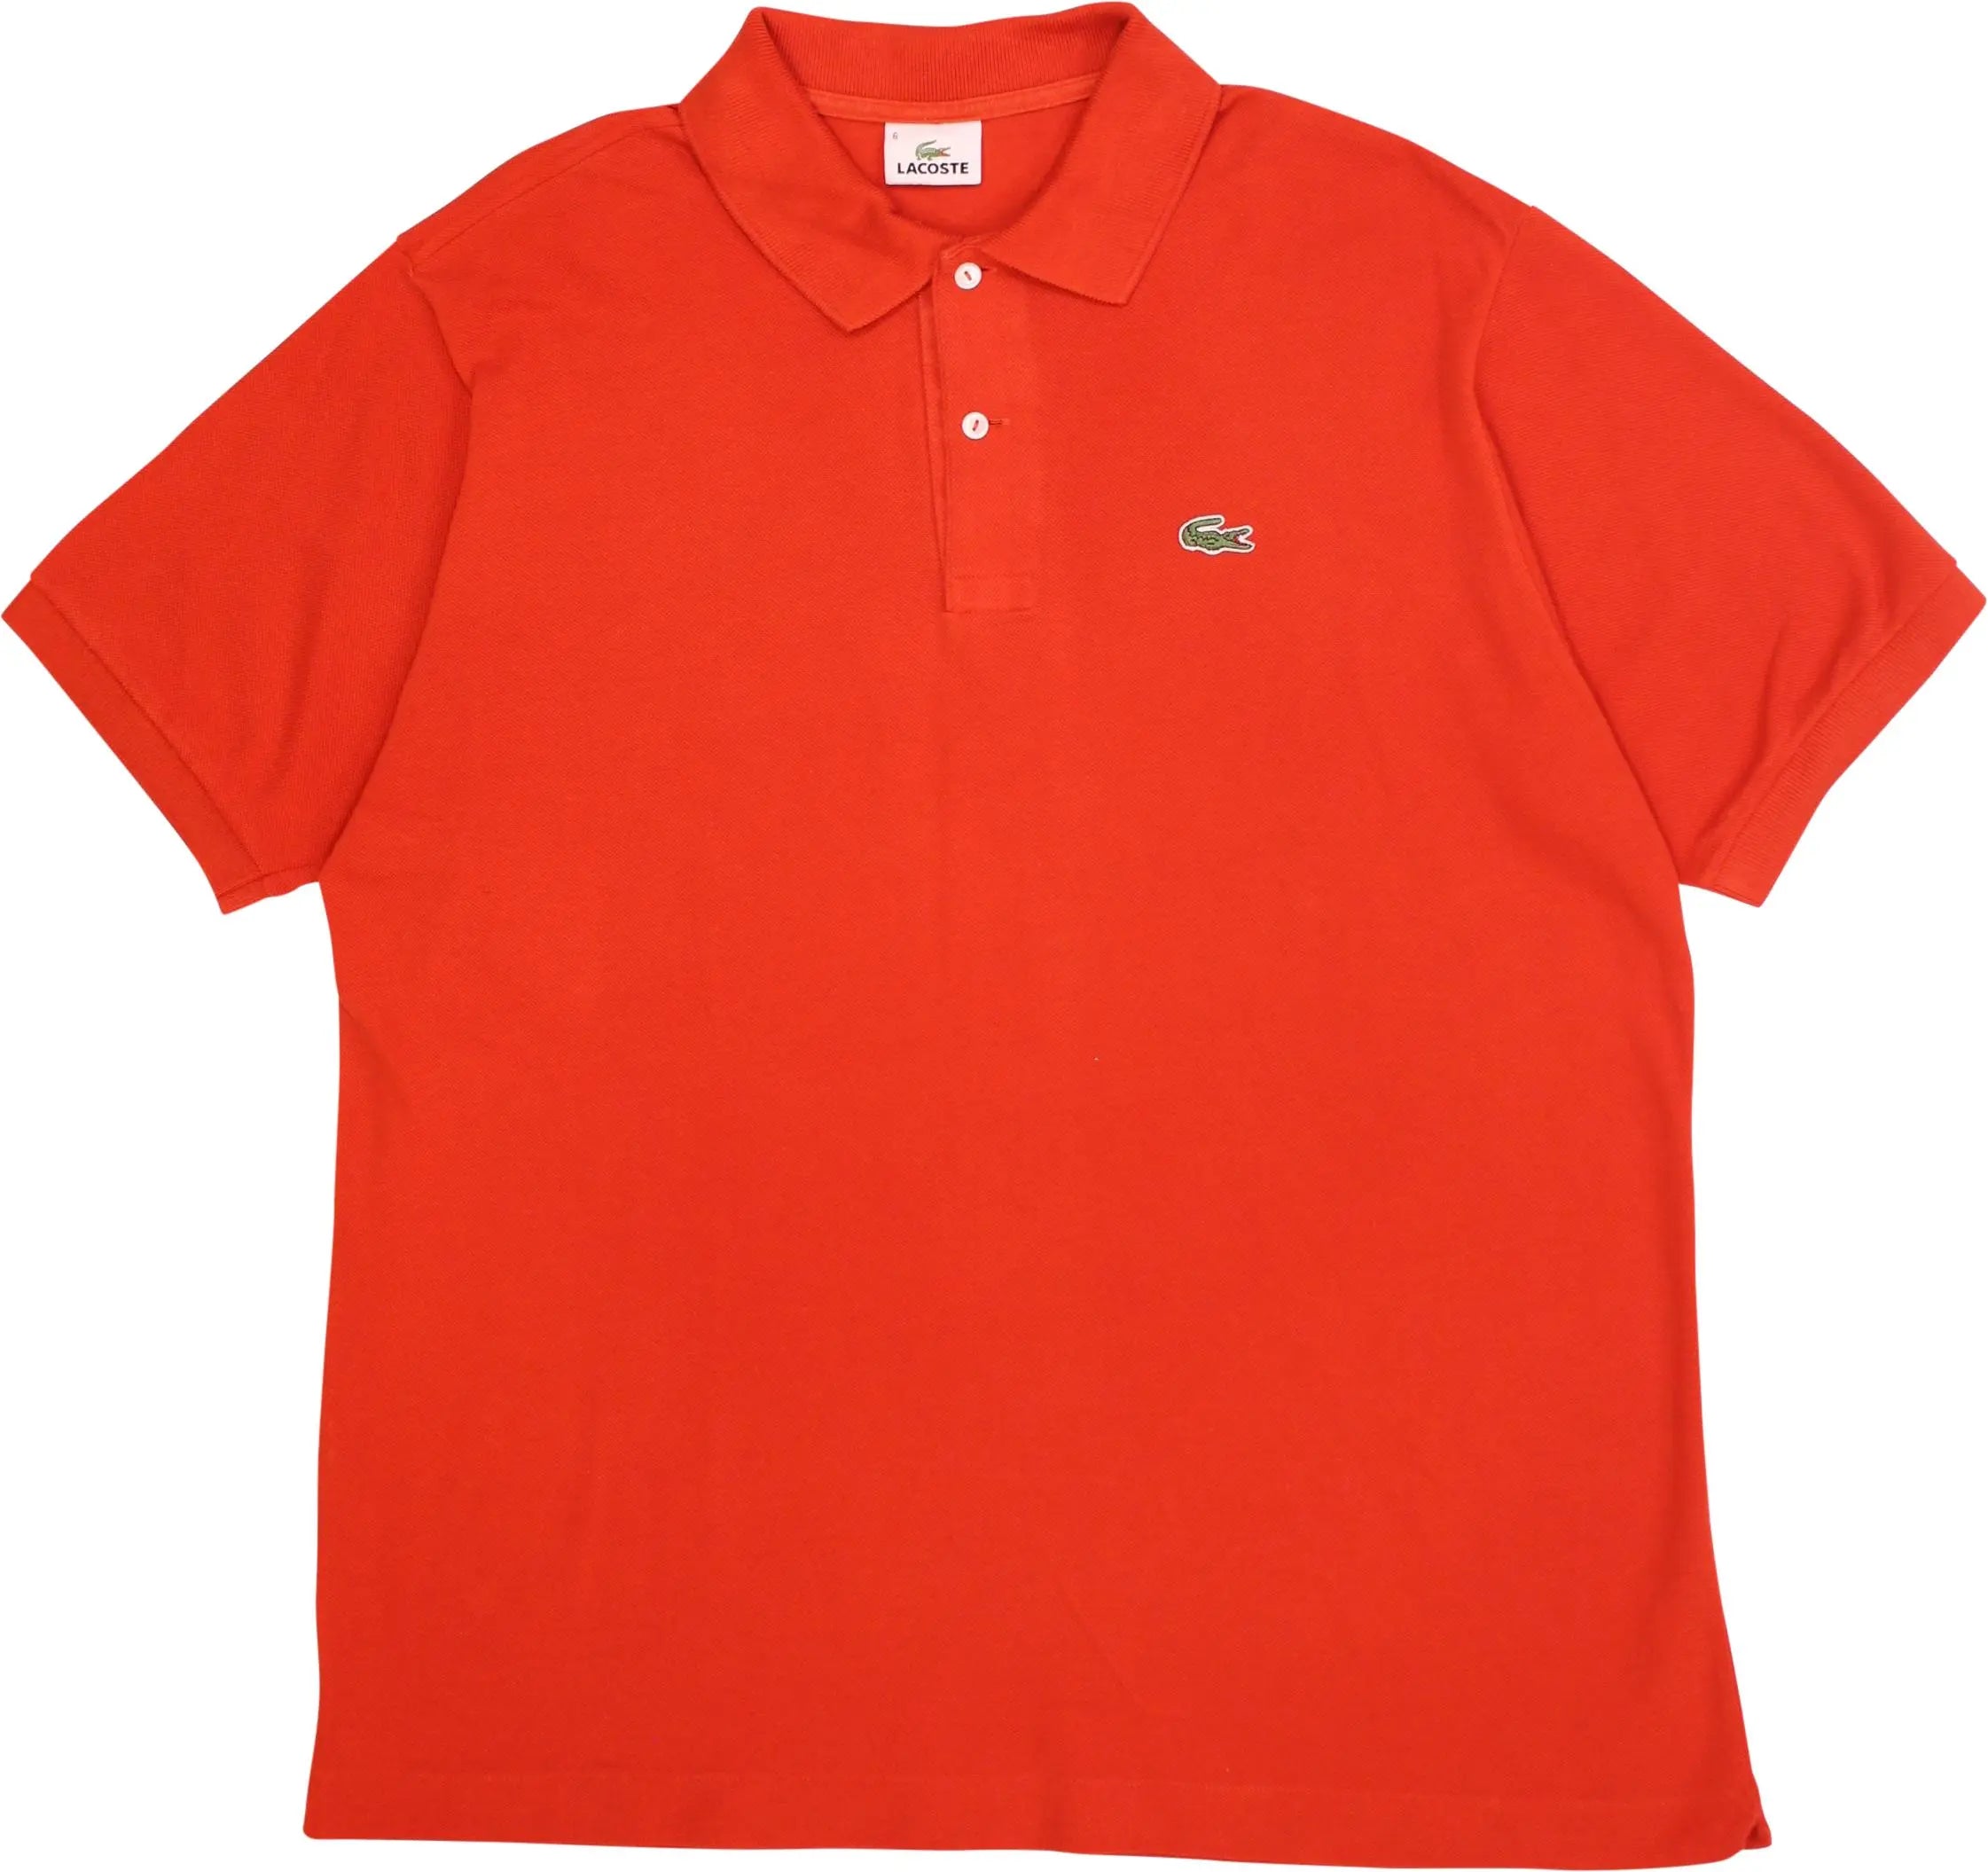 Lacoste - Orange Polo Shirt by Lacoste- ThriftTale.com - Vintage and second handclothing